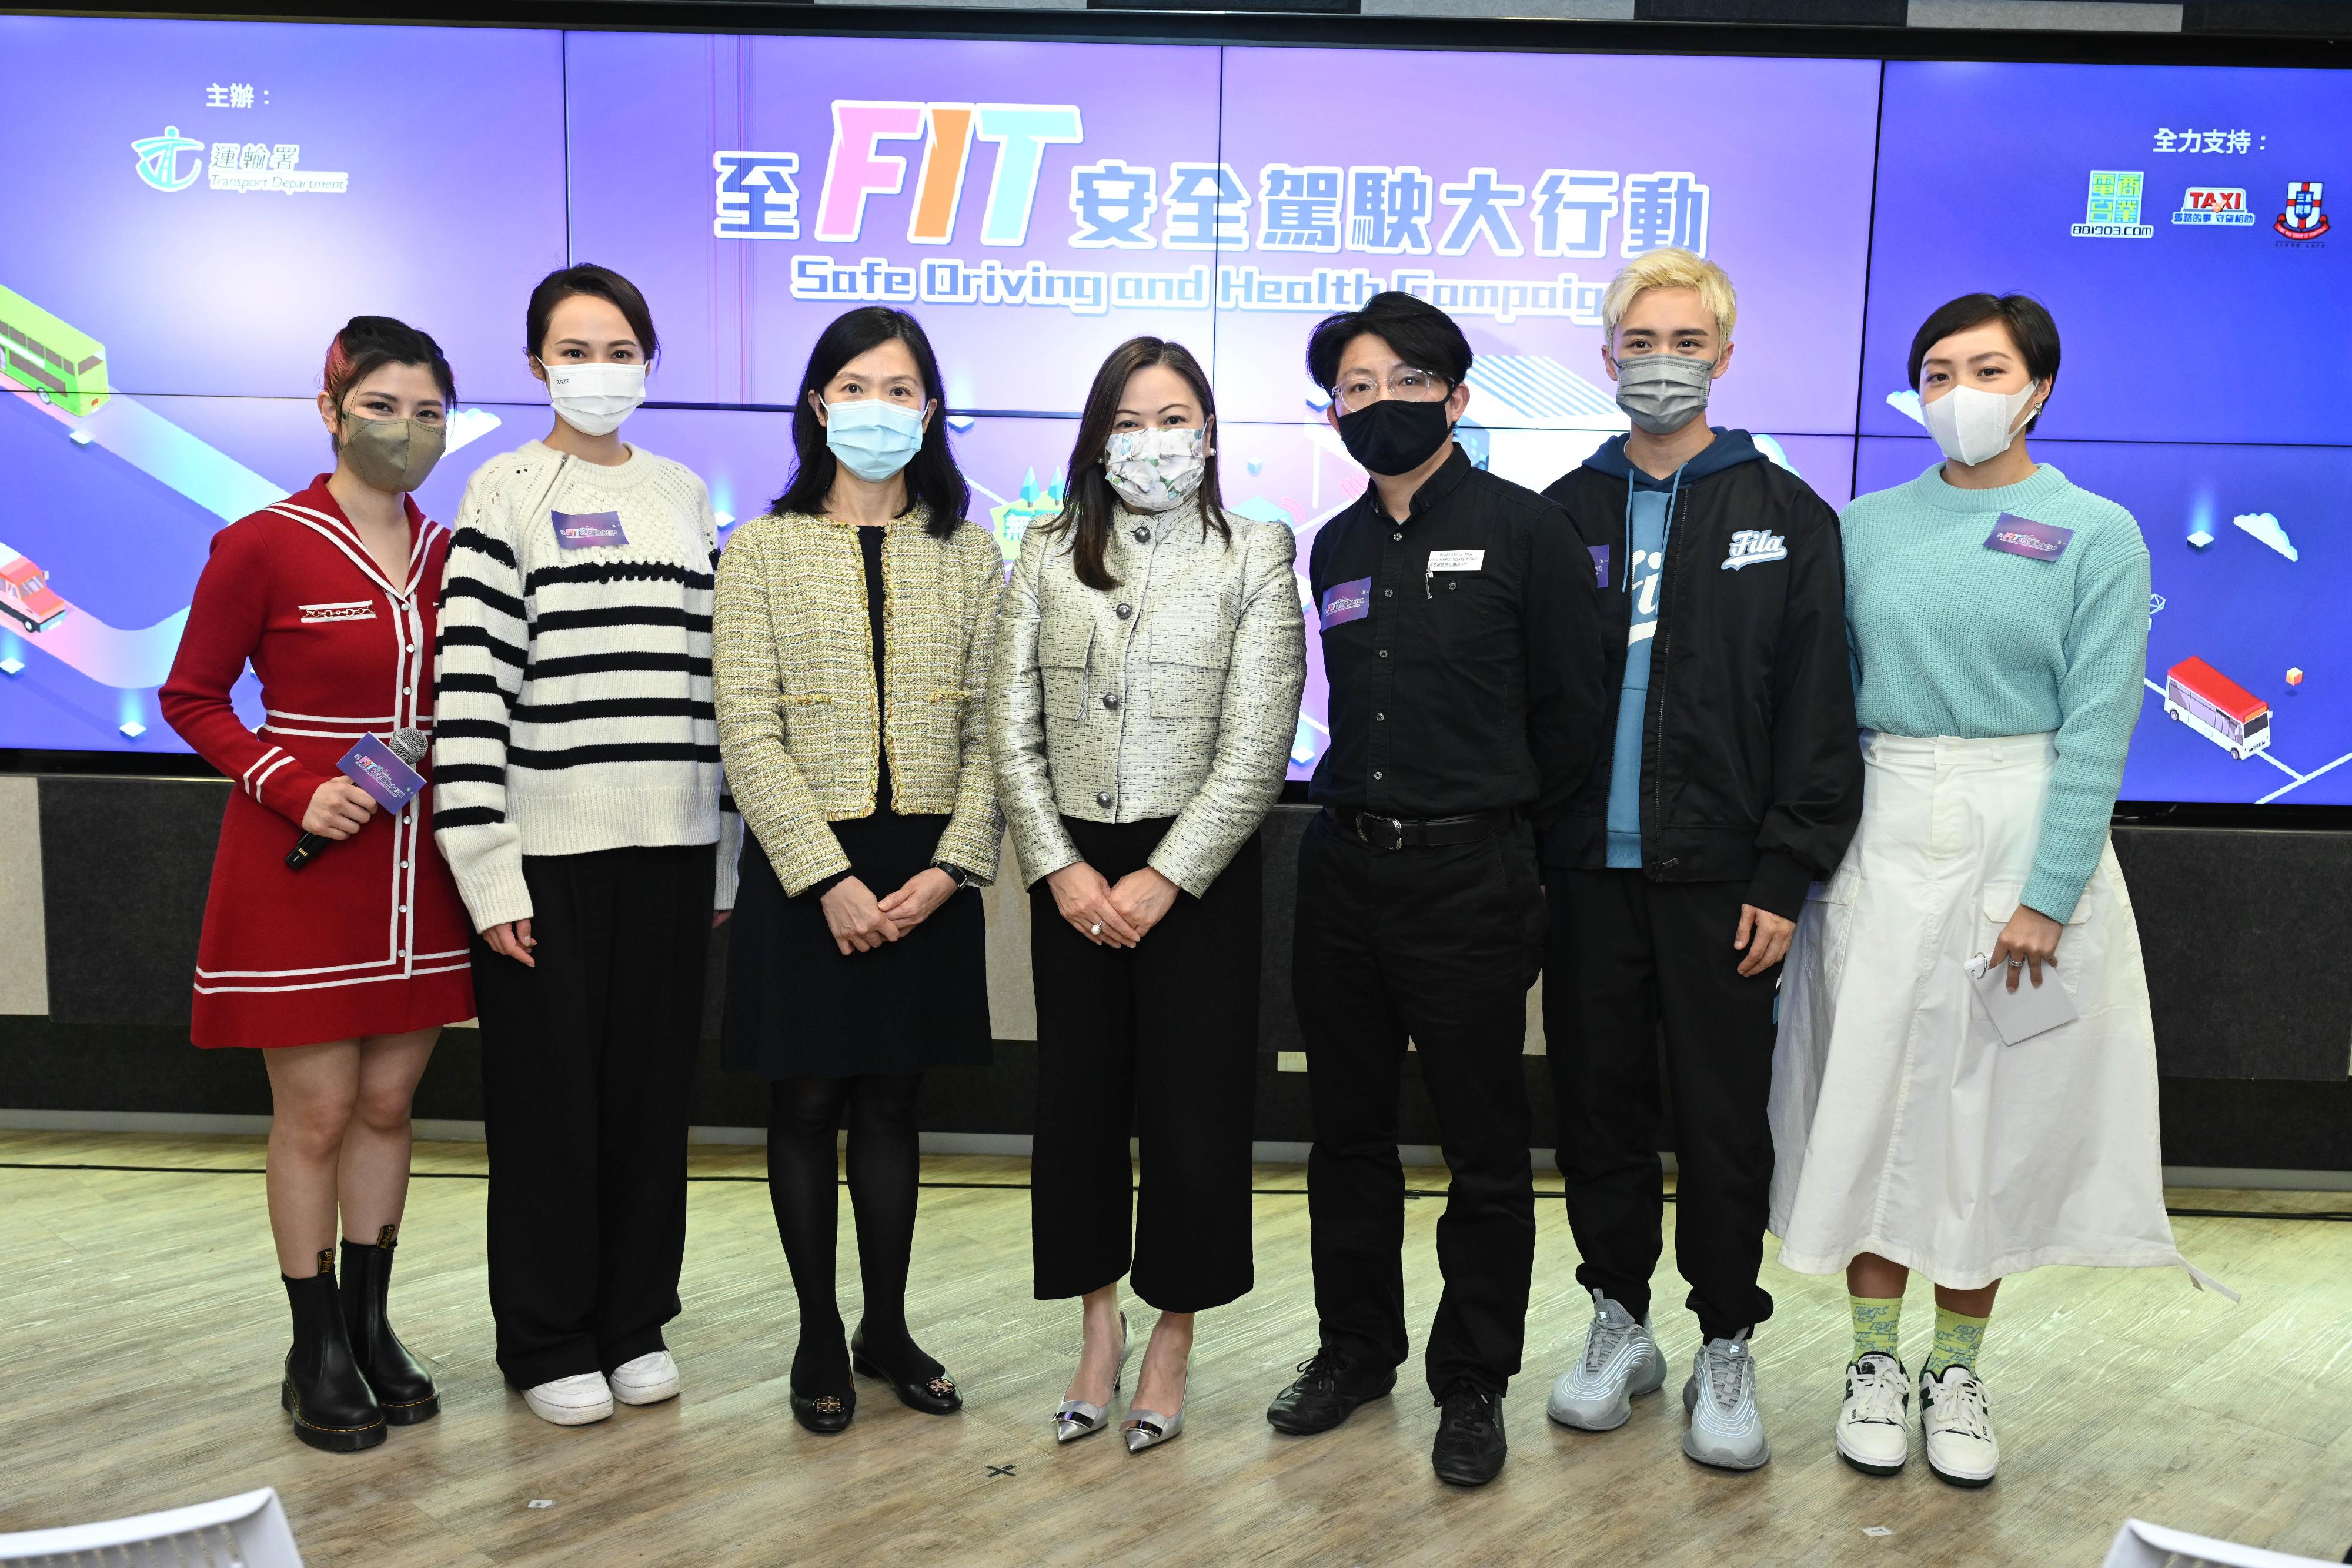 The Commissioner for Transport, Miss Rosanna Law (centre), together with Safe Driving and Health Campaign ambassadors Miss Gladys Yuen (first left) and Mr Zeno Koo (second right); Specialist in Respiratory Medicine of Tung Wah Group of Hospitals (TWGHs) Dr Veronica Chan (third left); and Centre in Charge of TWGHs Rehabilitation Centre and Physiotherapist I Mr Glen Wong (third right), encouraged commercial vehicle drivers to quit smoking and continue to pay attention to safe driving and health with a view to enhancing the road safety, at a health seminar under the Safe Driving and Health Campaign held today (February 28).